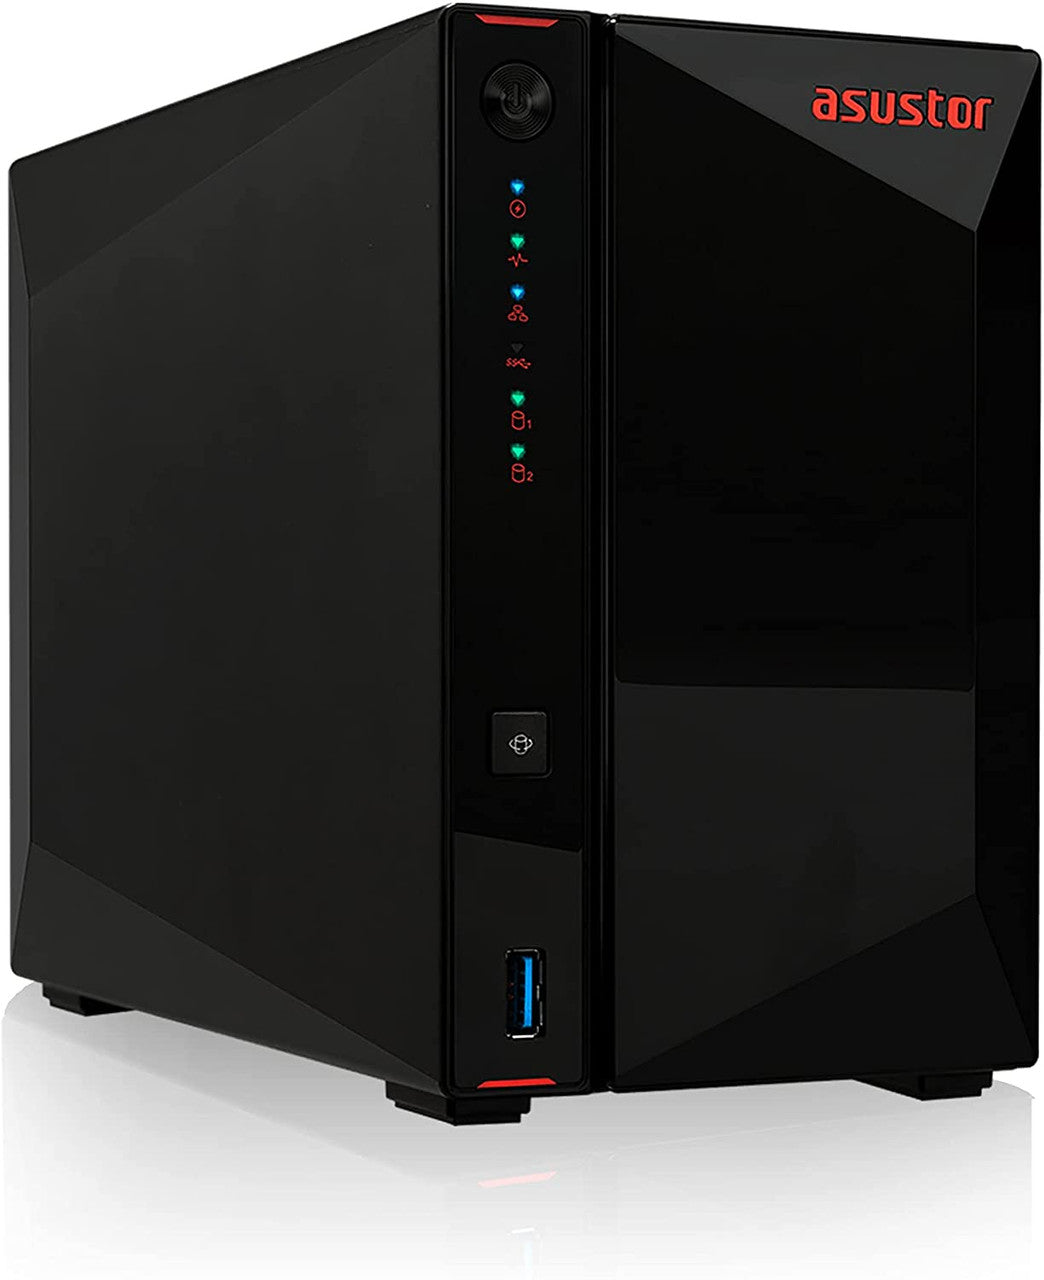 Asustor AS5202T 2-Bay Nimbustor 2 NAS with 2GB RAM and 40TB (2 x 20TB) Seagate Ironwolf PRO Drives Fully Assembled and Tested